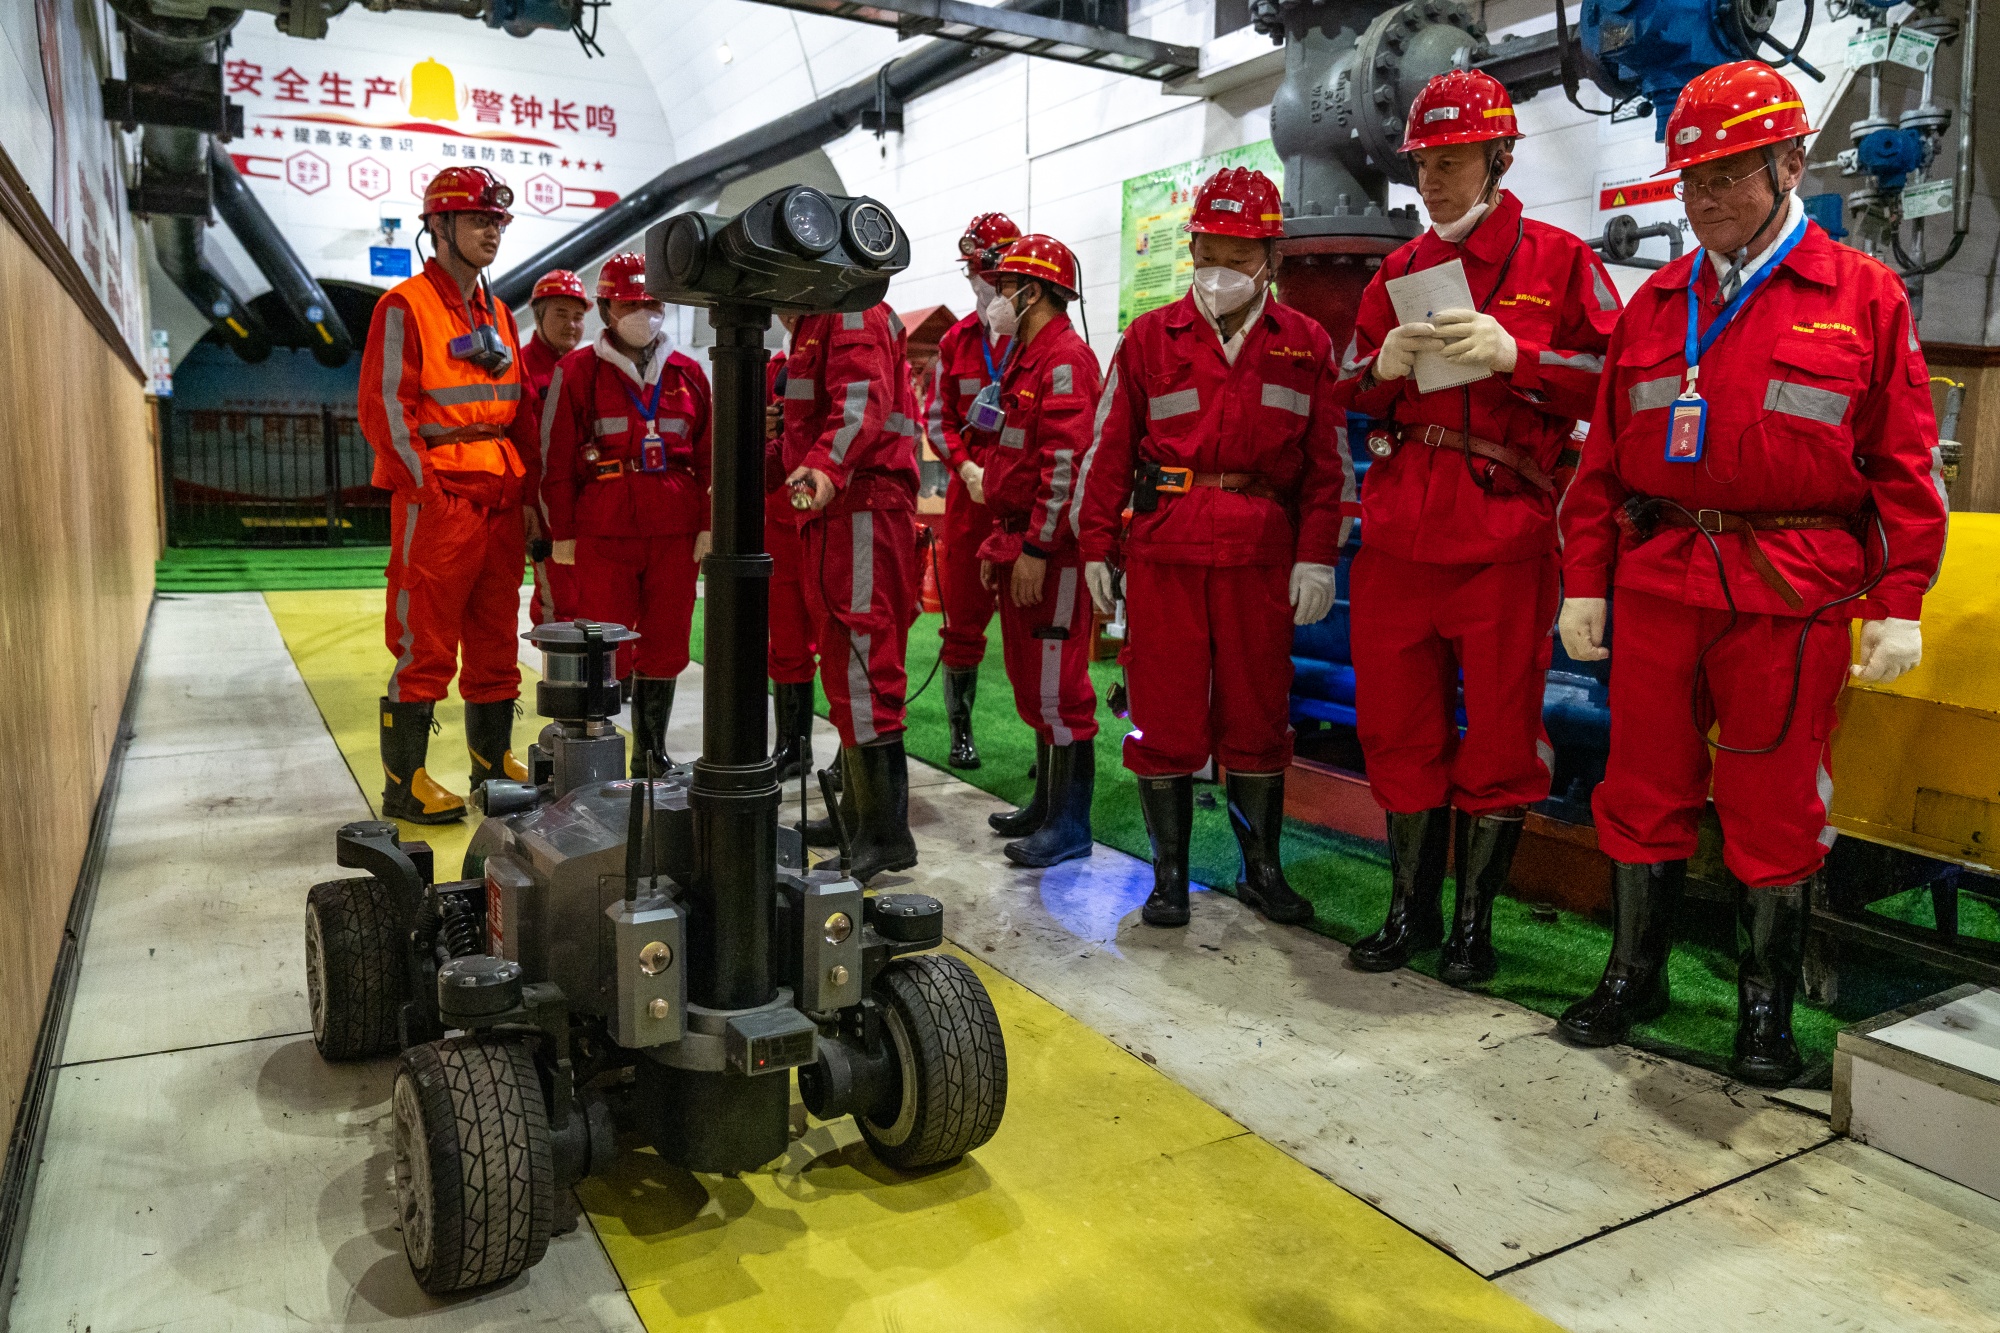 China Invests in Robots, Tech in Coal Mining Despite Renewables Green Shift  - Bloomberg